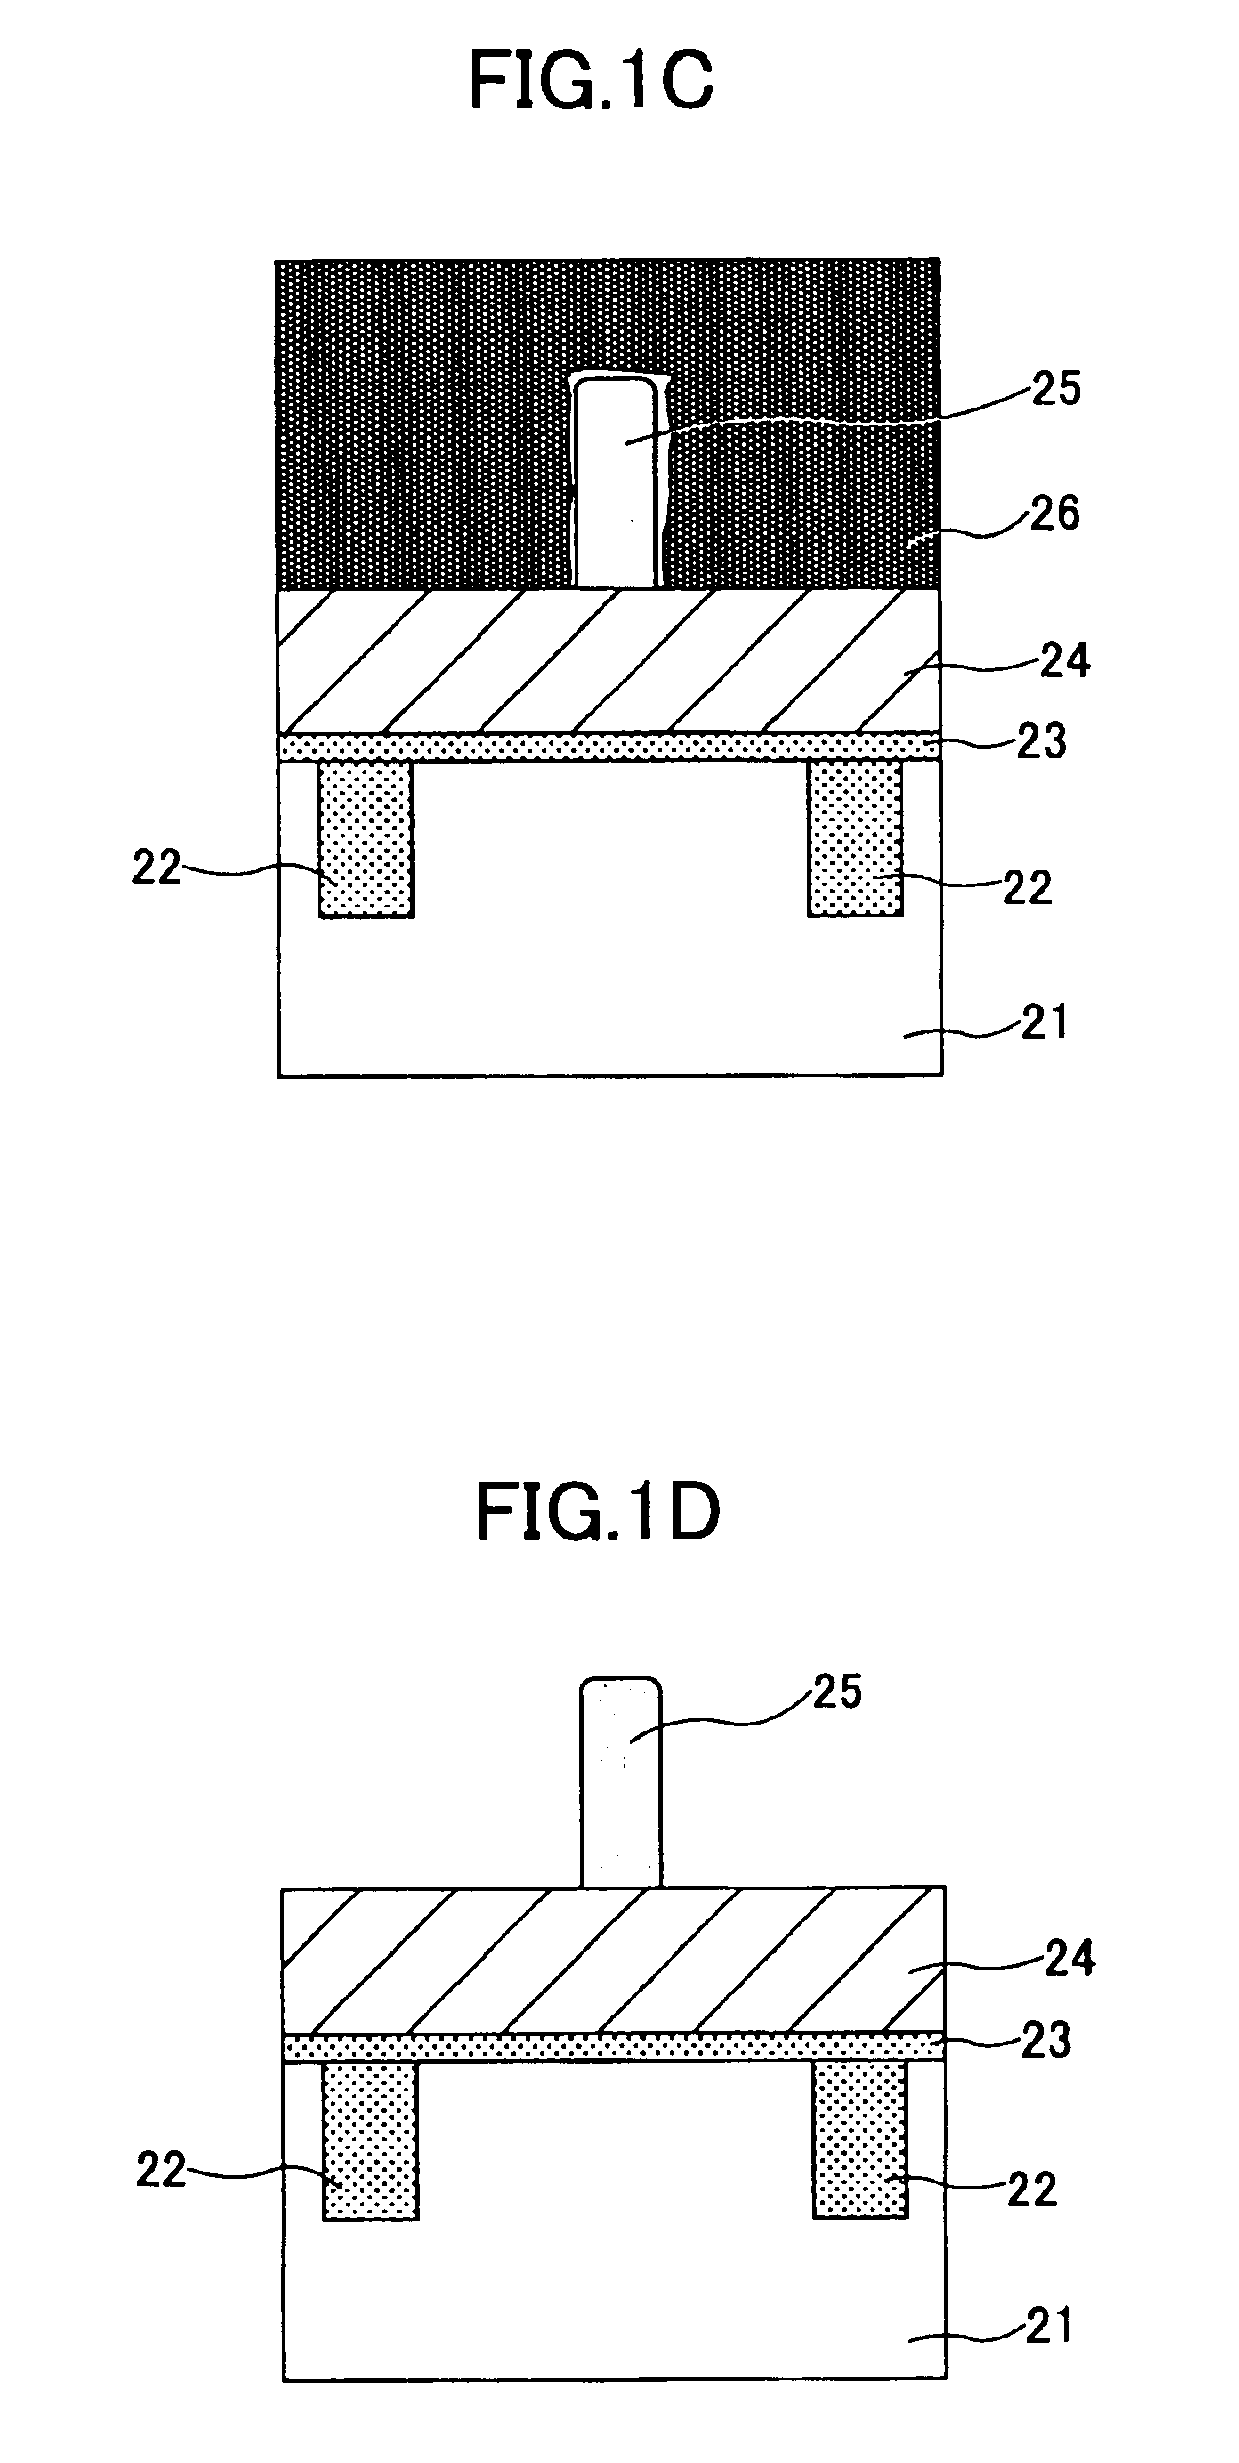 Semiconductor apparatus fabrication method forming a resist pattern, a film over the resist, and reflowing the resist